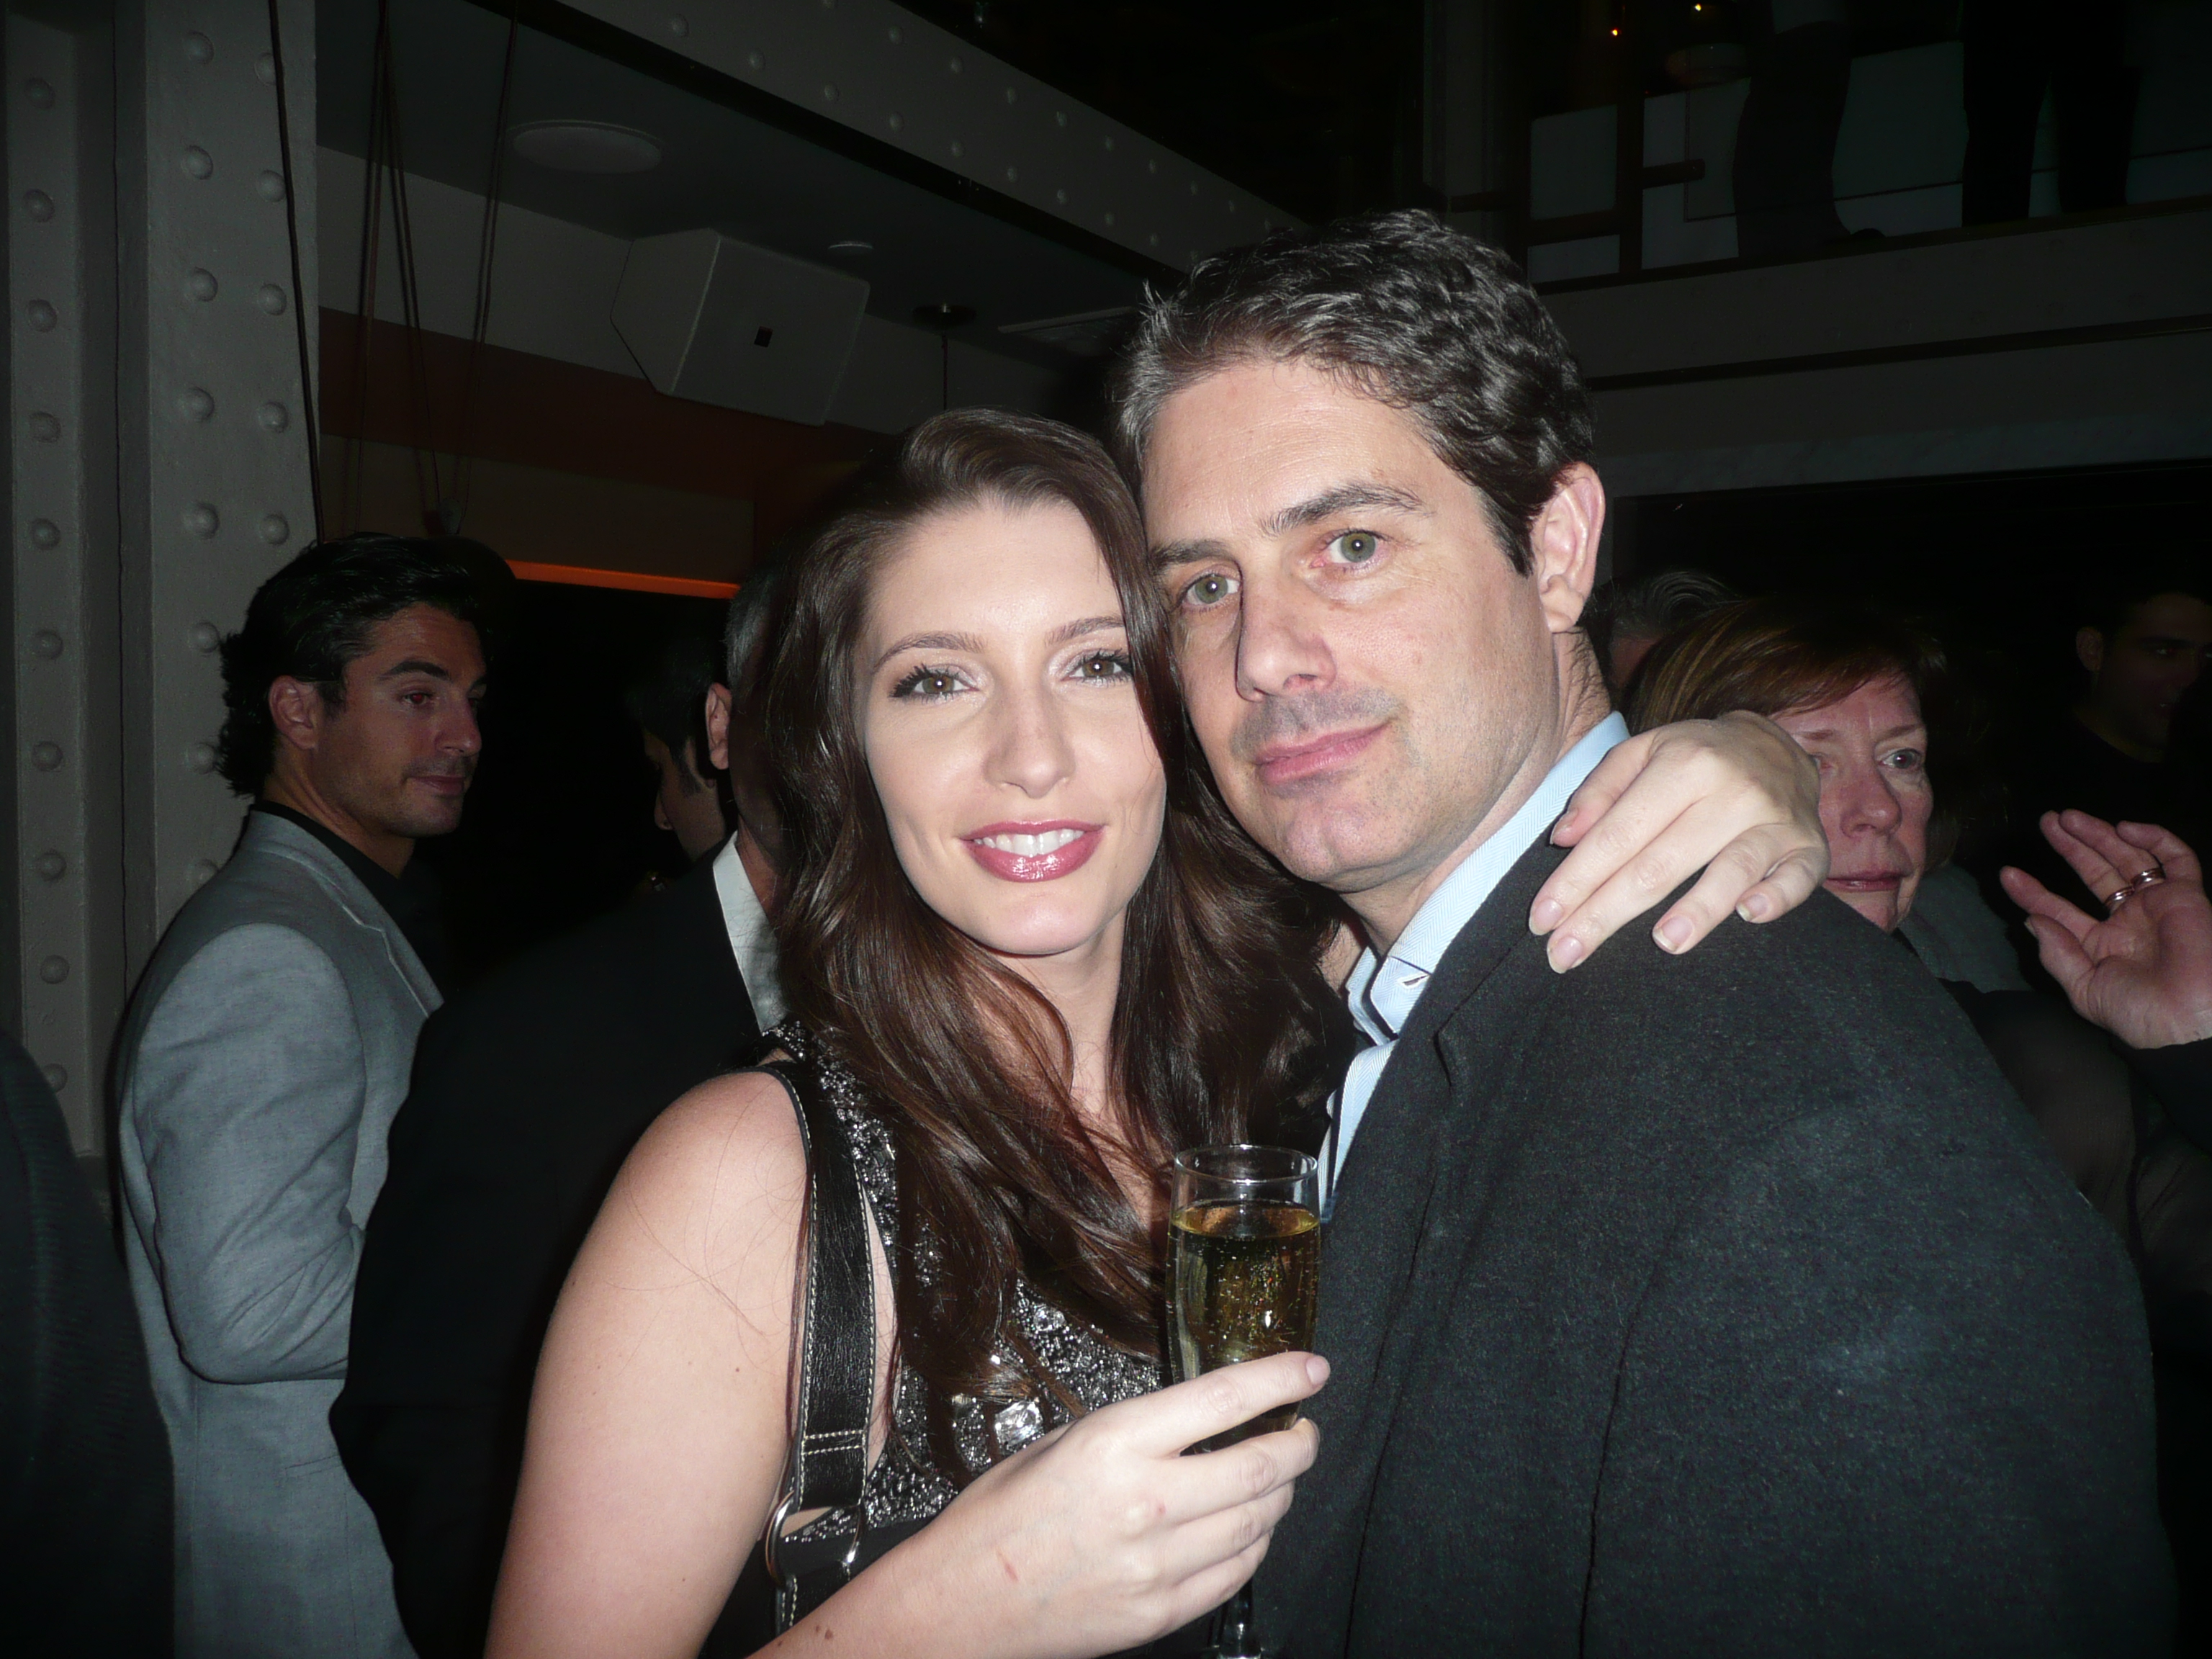 Ashley Anderson at the Brothers movie screening in 2009.